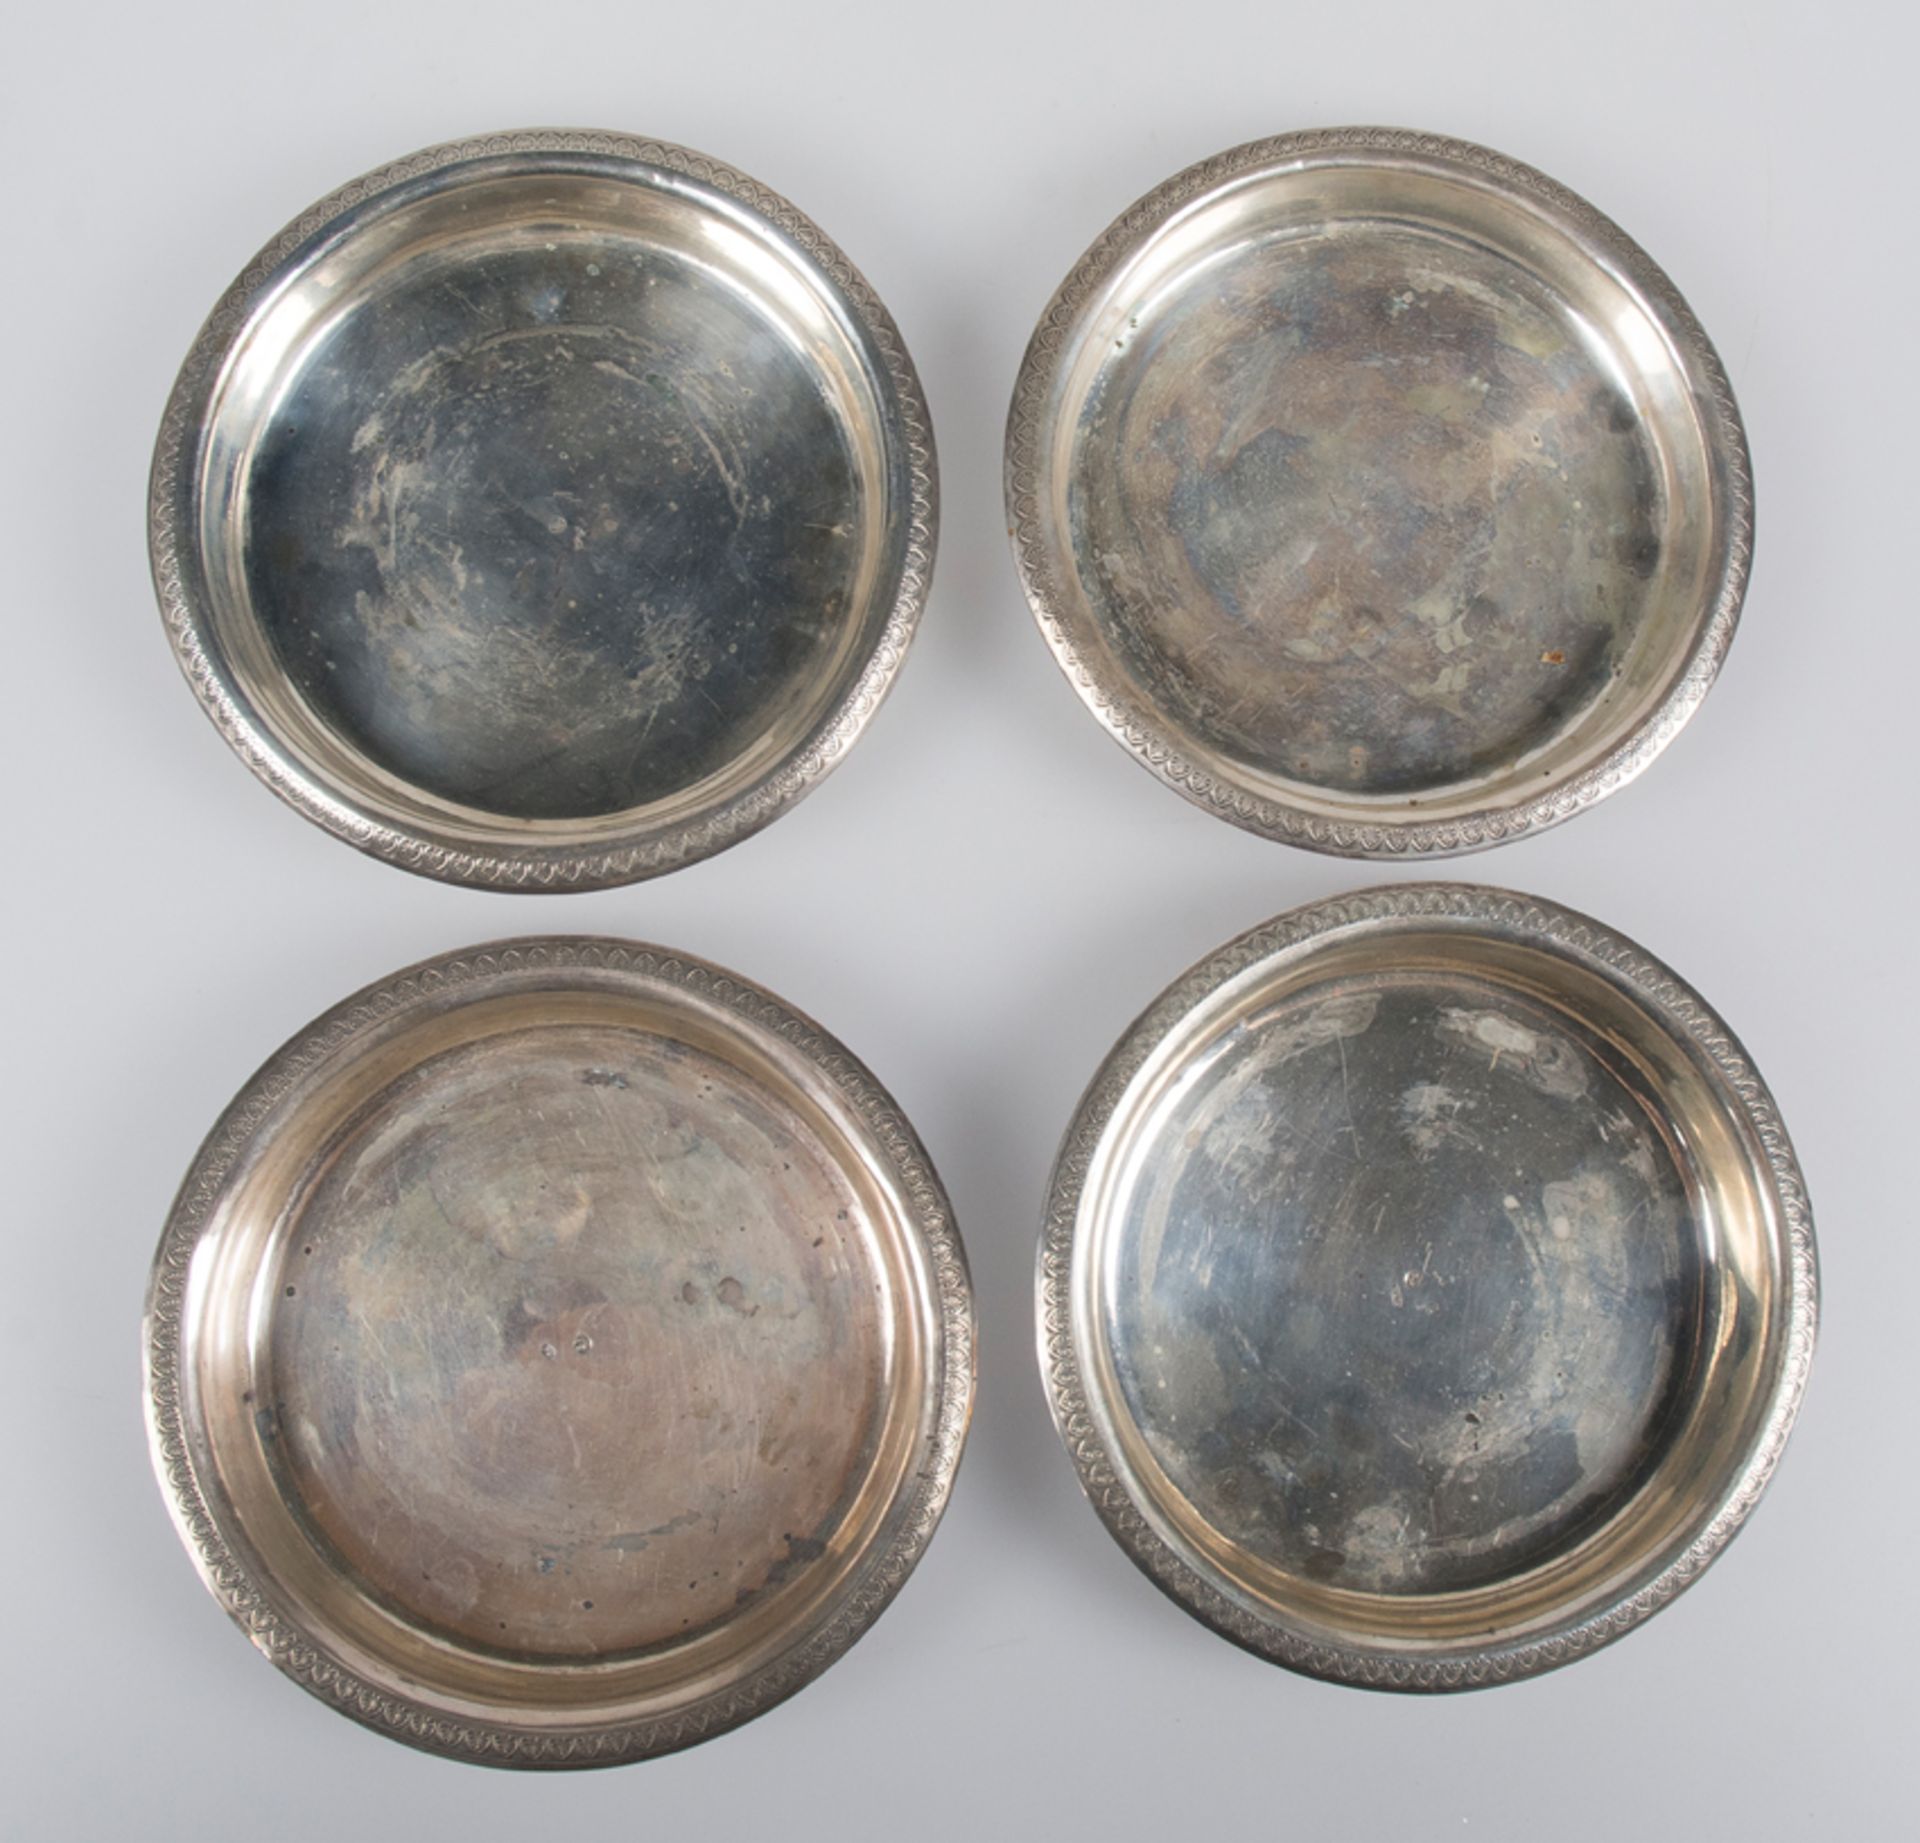 Set of four silver bottle bases. Marked "Carreras" and with Barcelona marks .